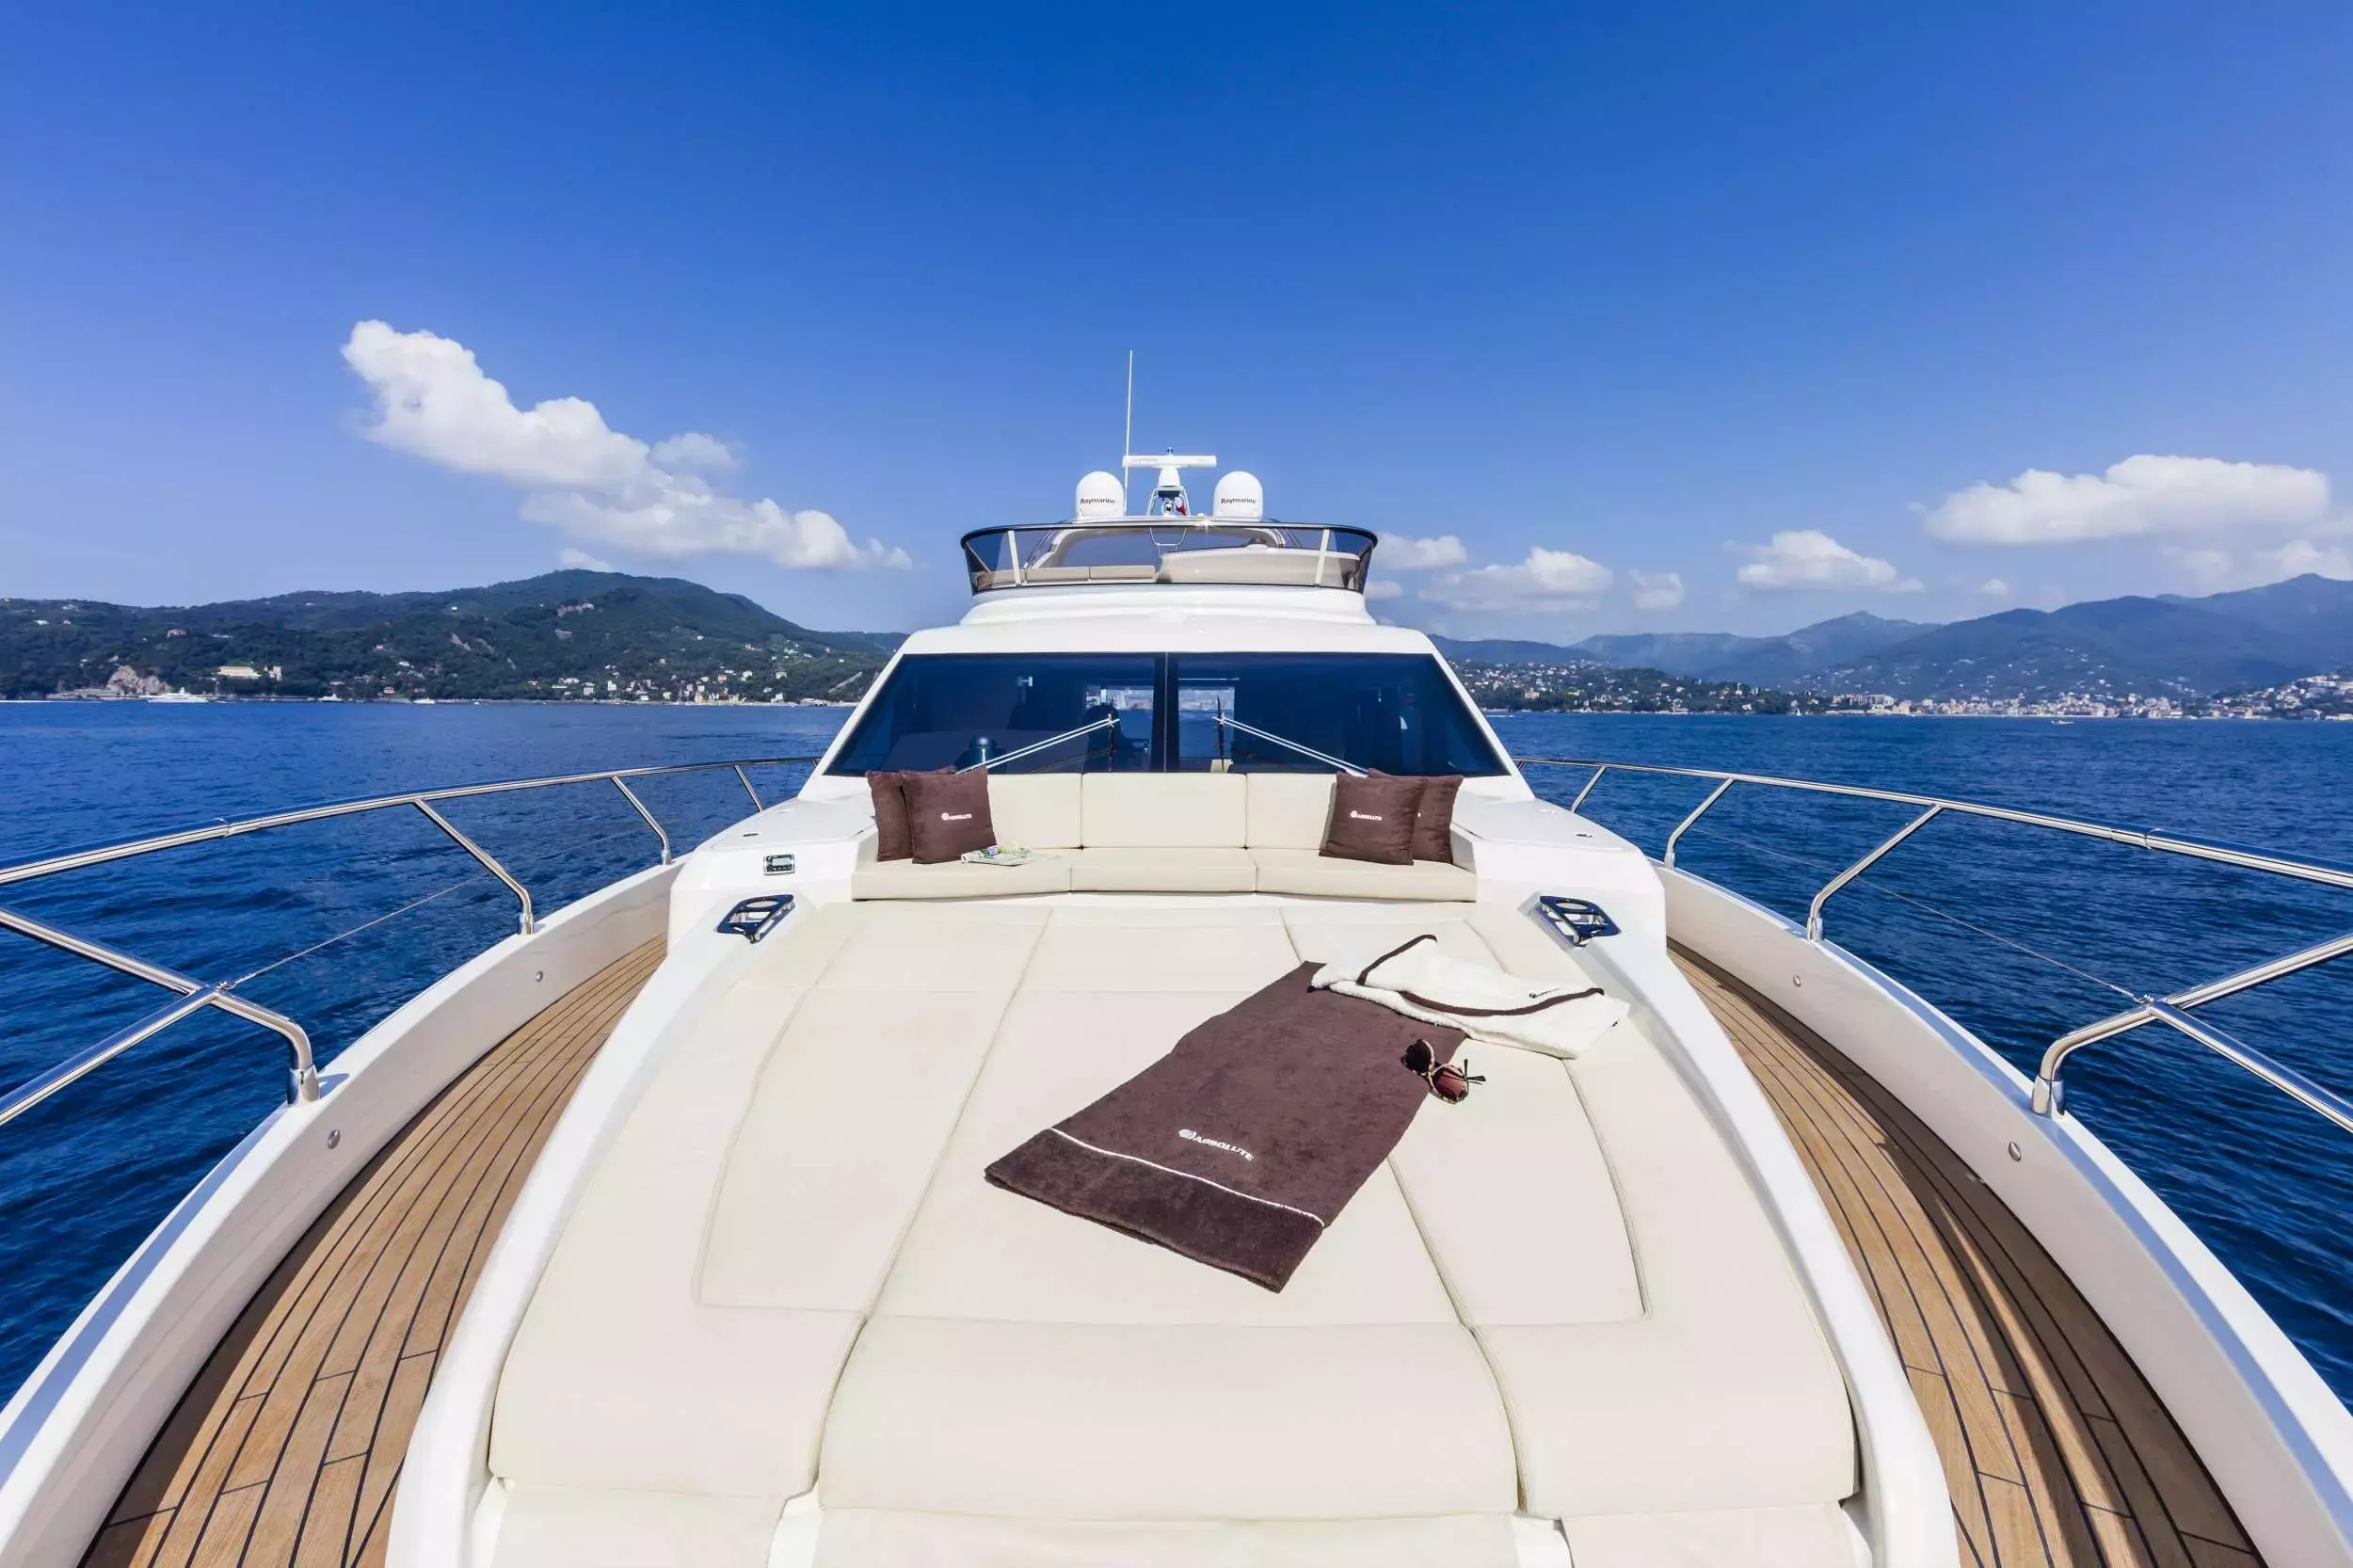 Absolute by Absolute Yachts - Special Offer for a private Motor Yacht Charter in Corsica with a crew